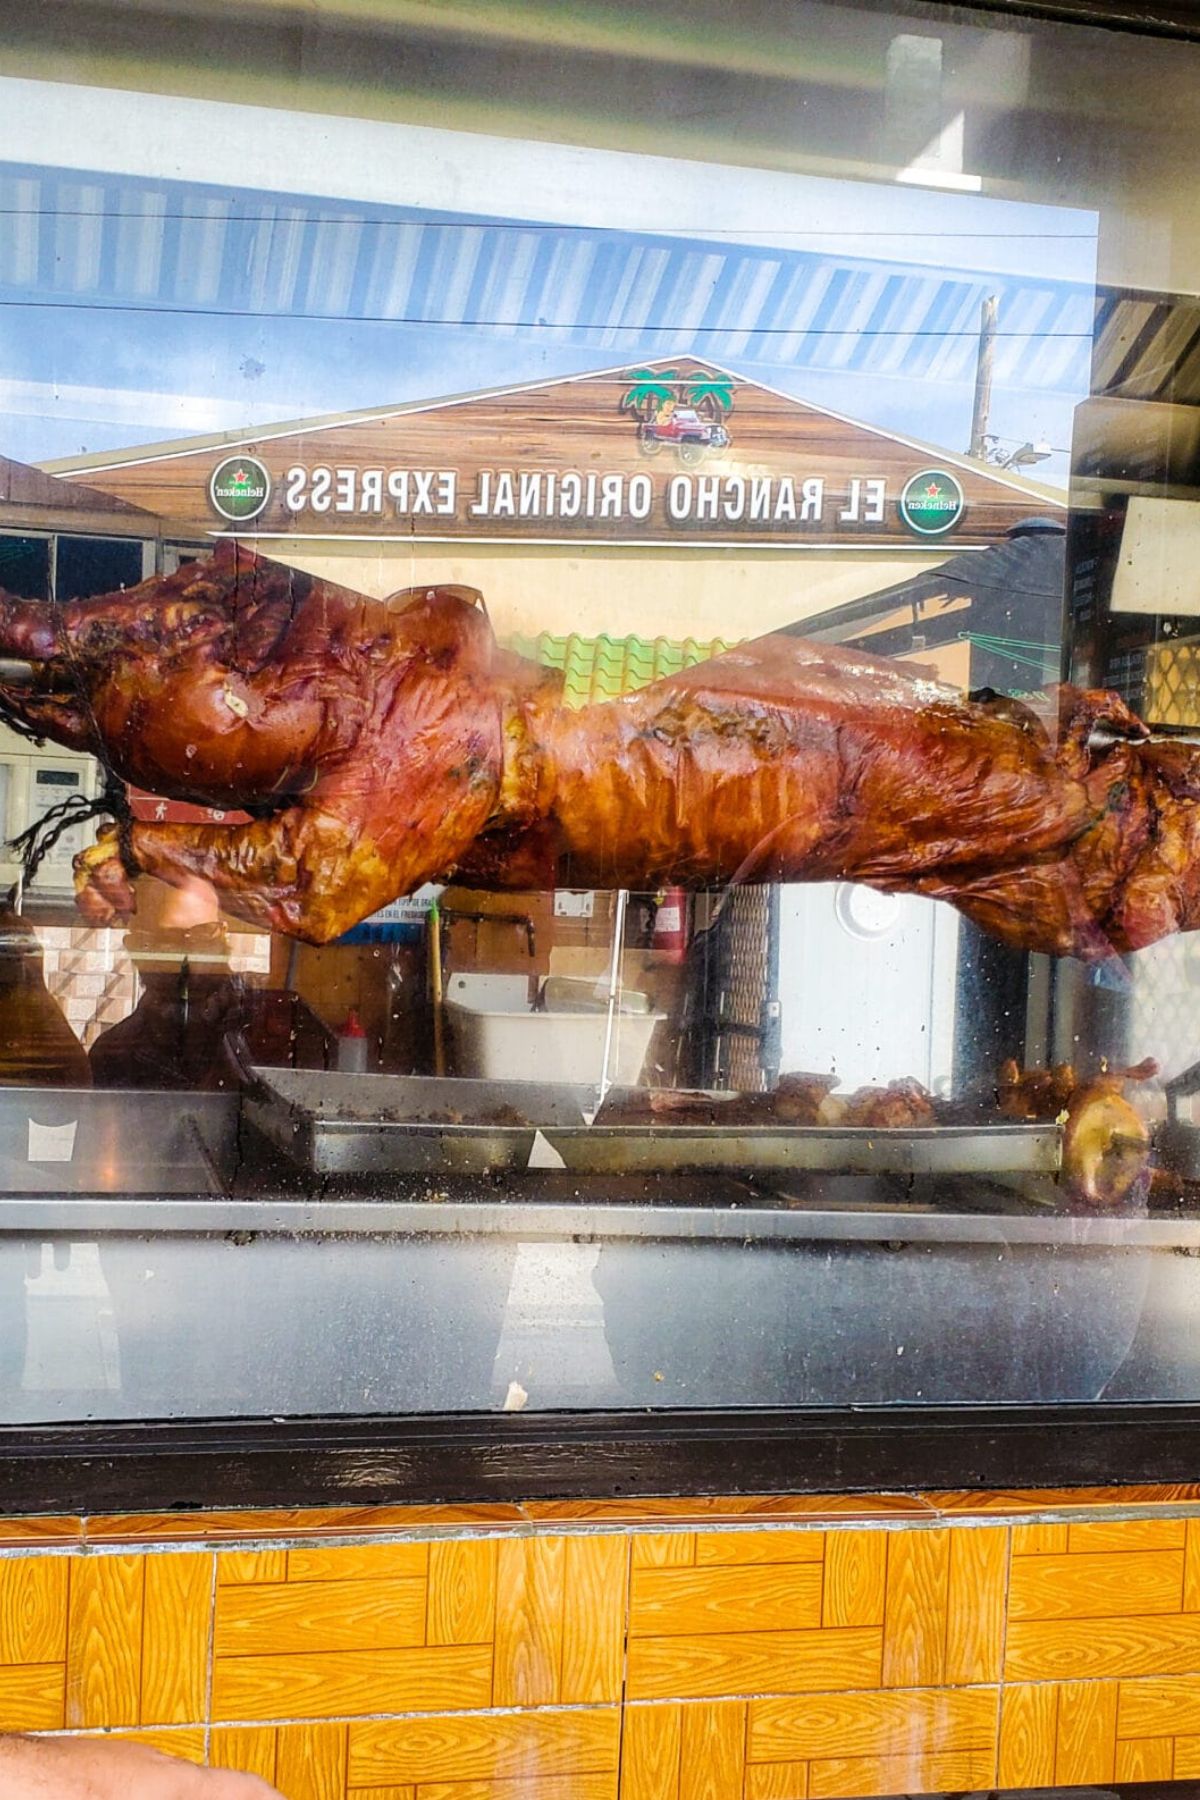 A roasted pig  at the window of a popular restaurant in Guavate, Puerto Rico.